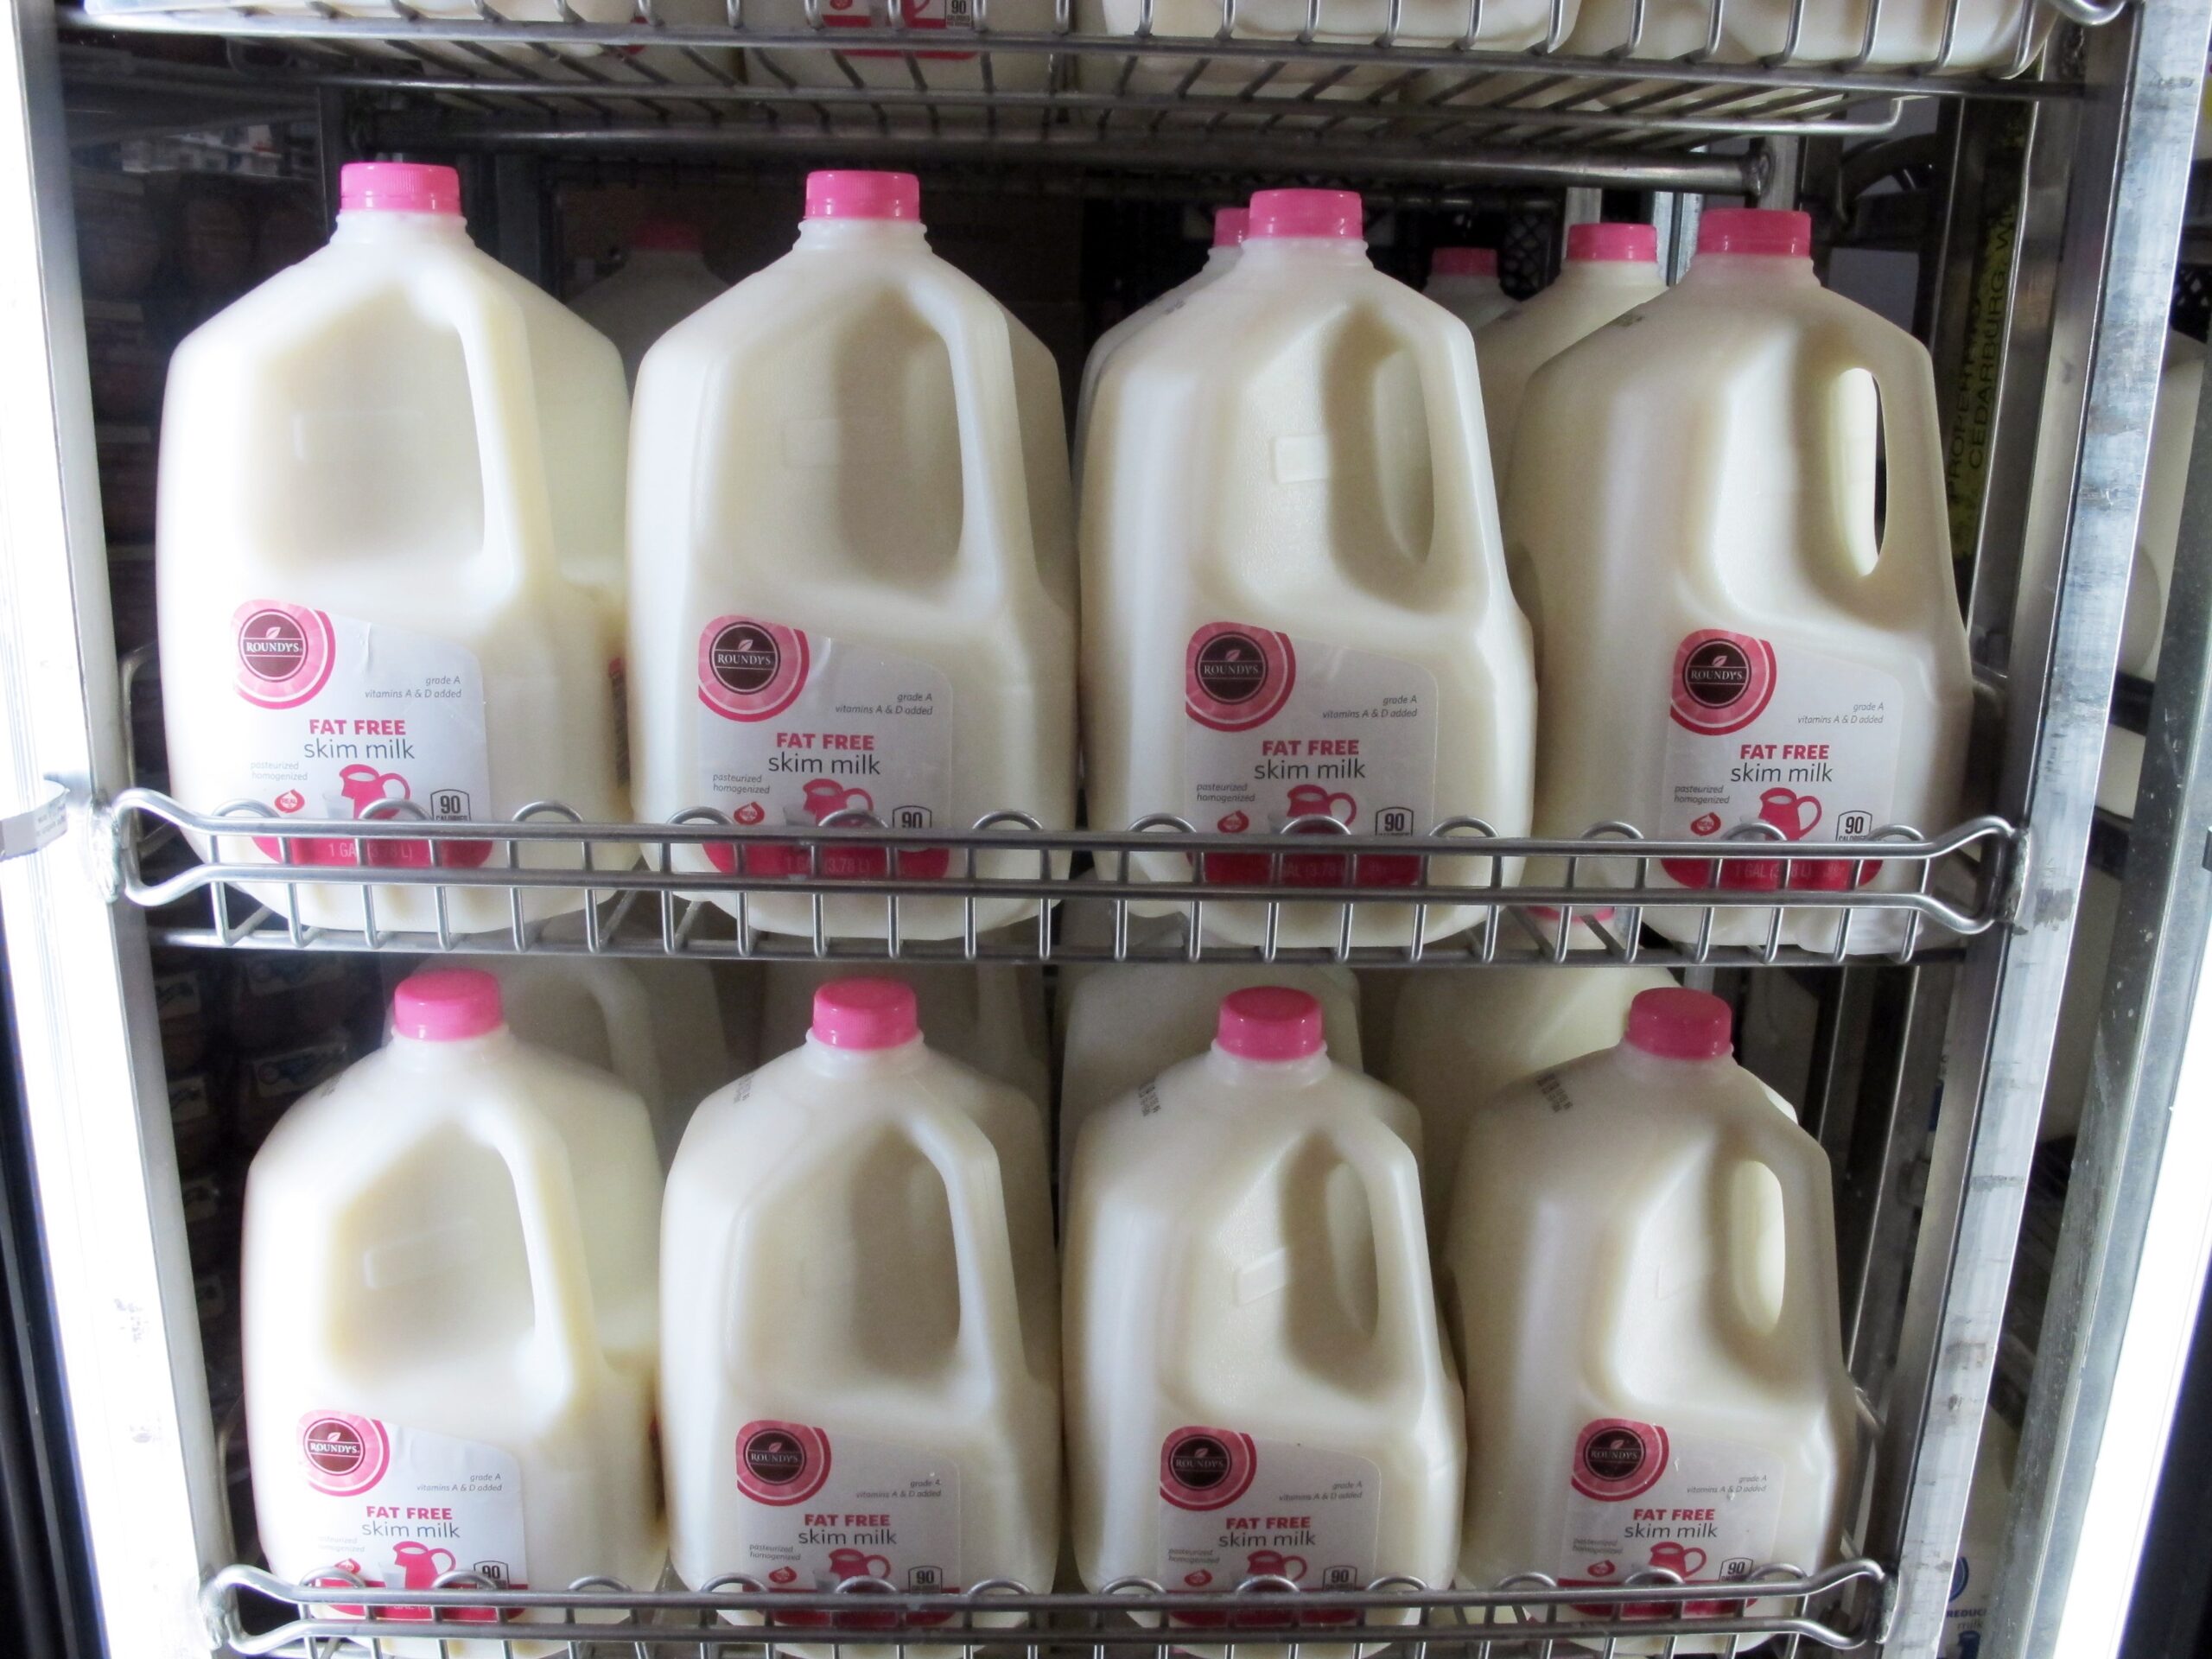 Wisconsin farmers are experiencing record high milk prices, but for how long?